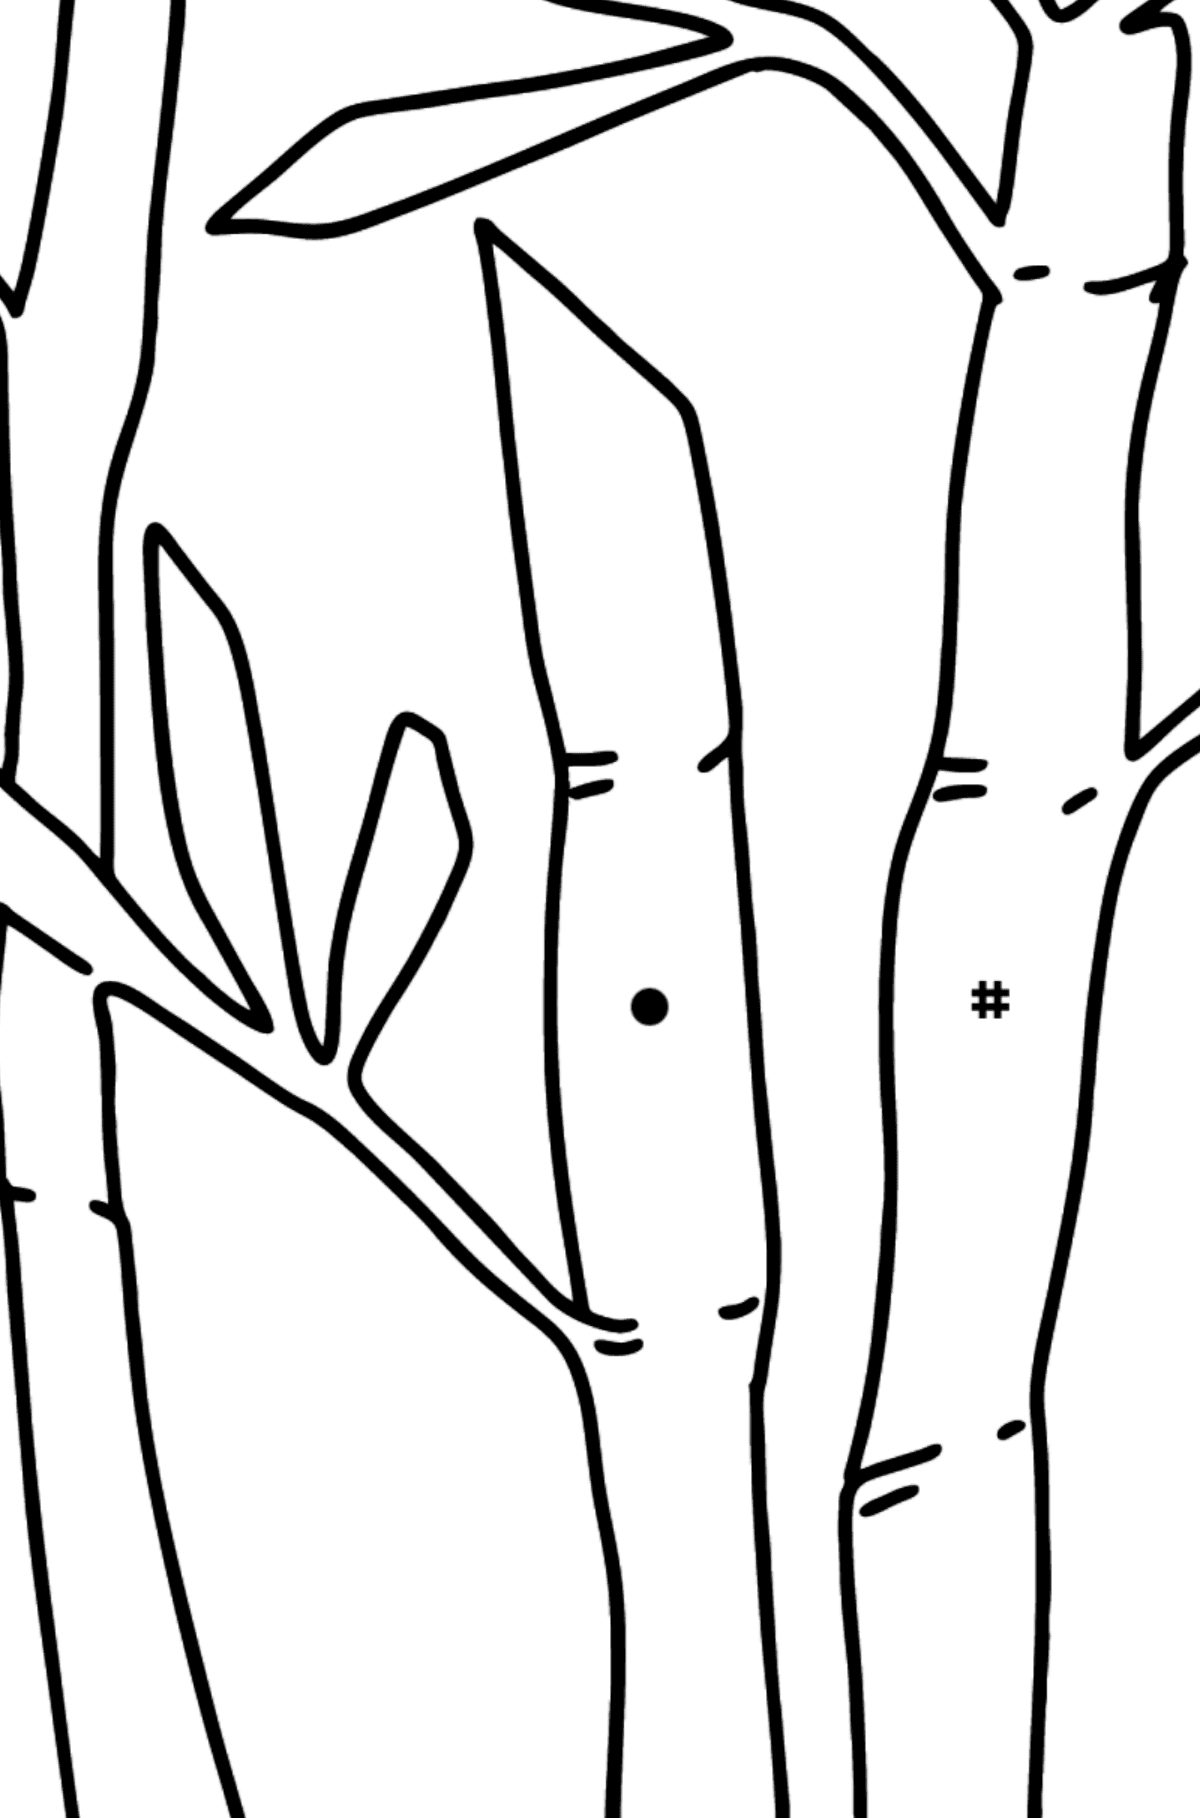 Bamboo coloring page - simple - Coloring by Symbols for Kids